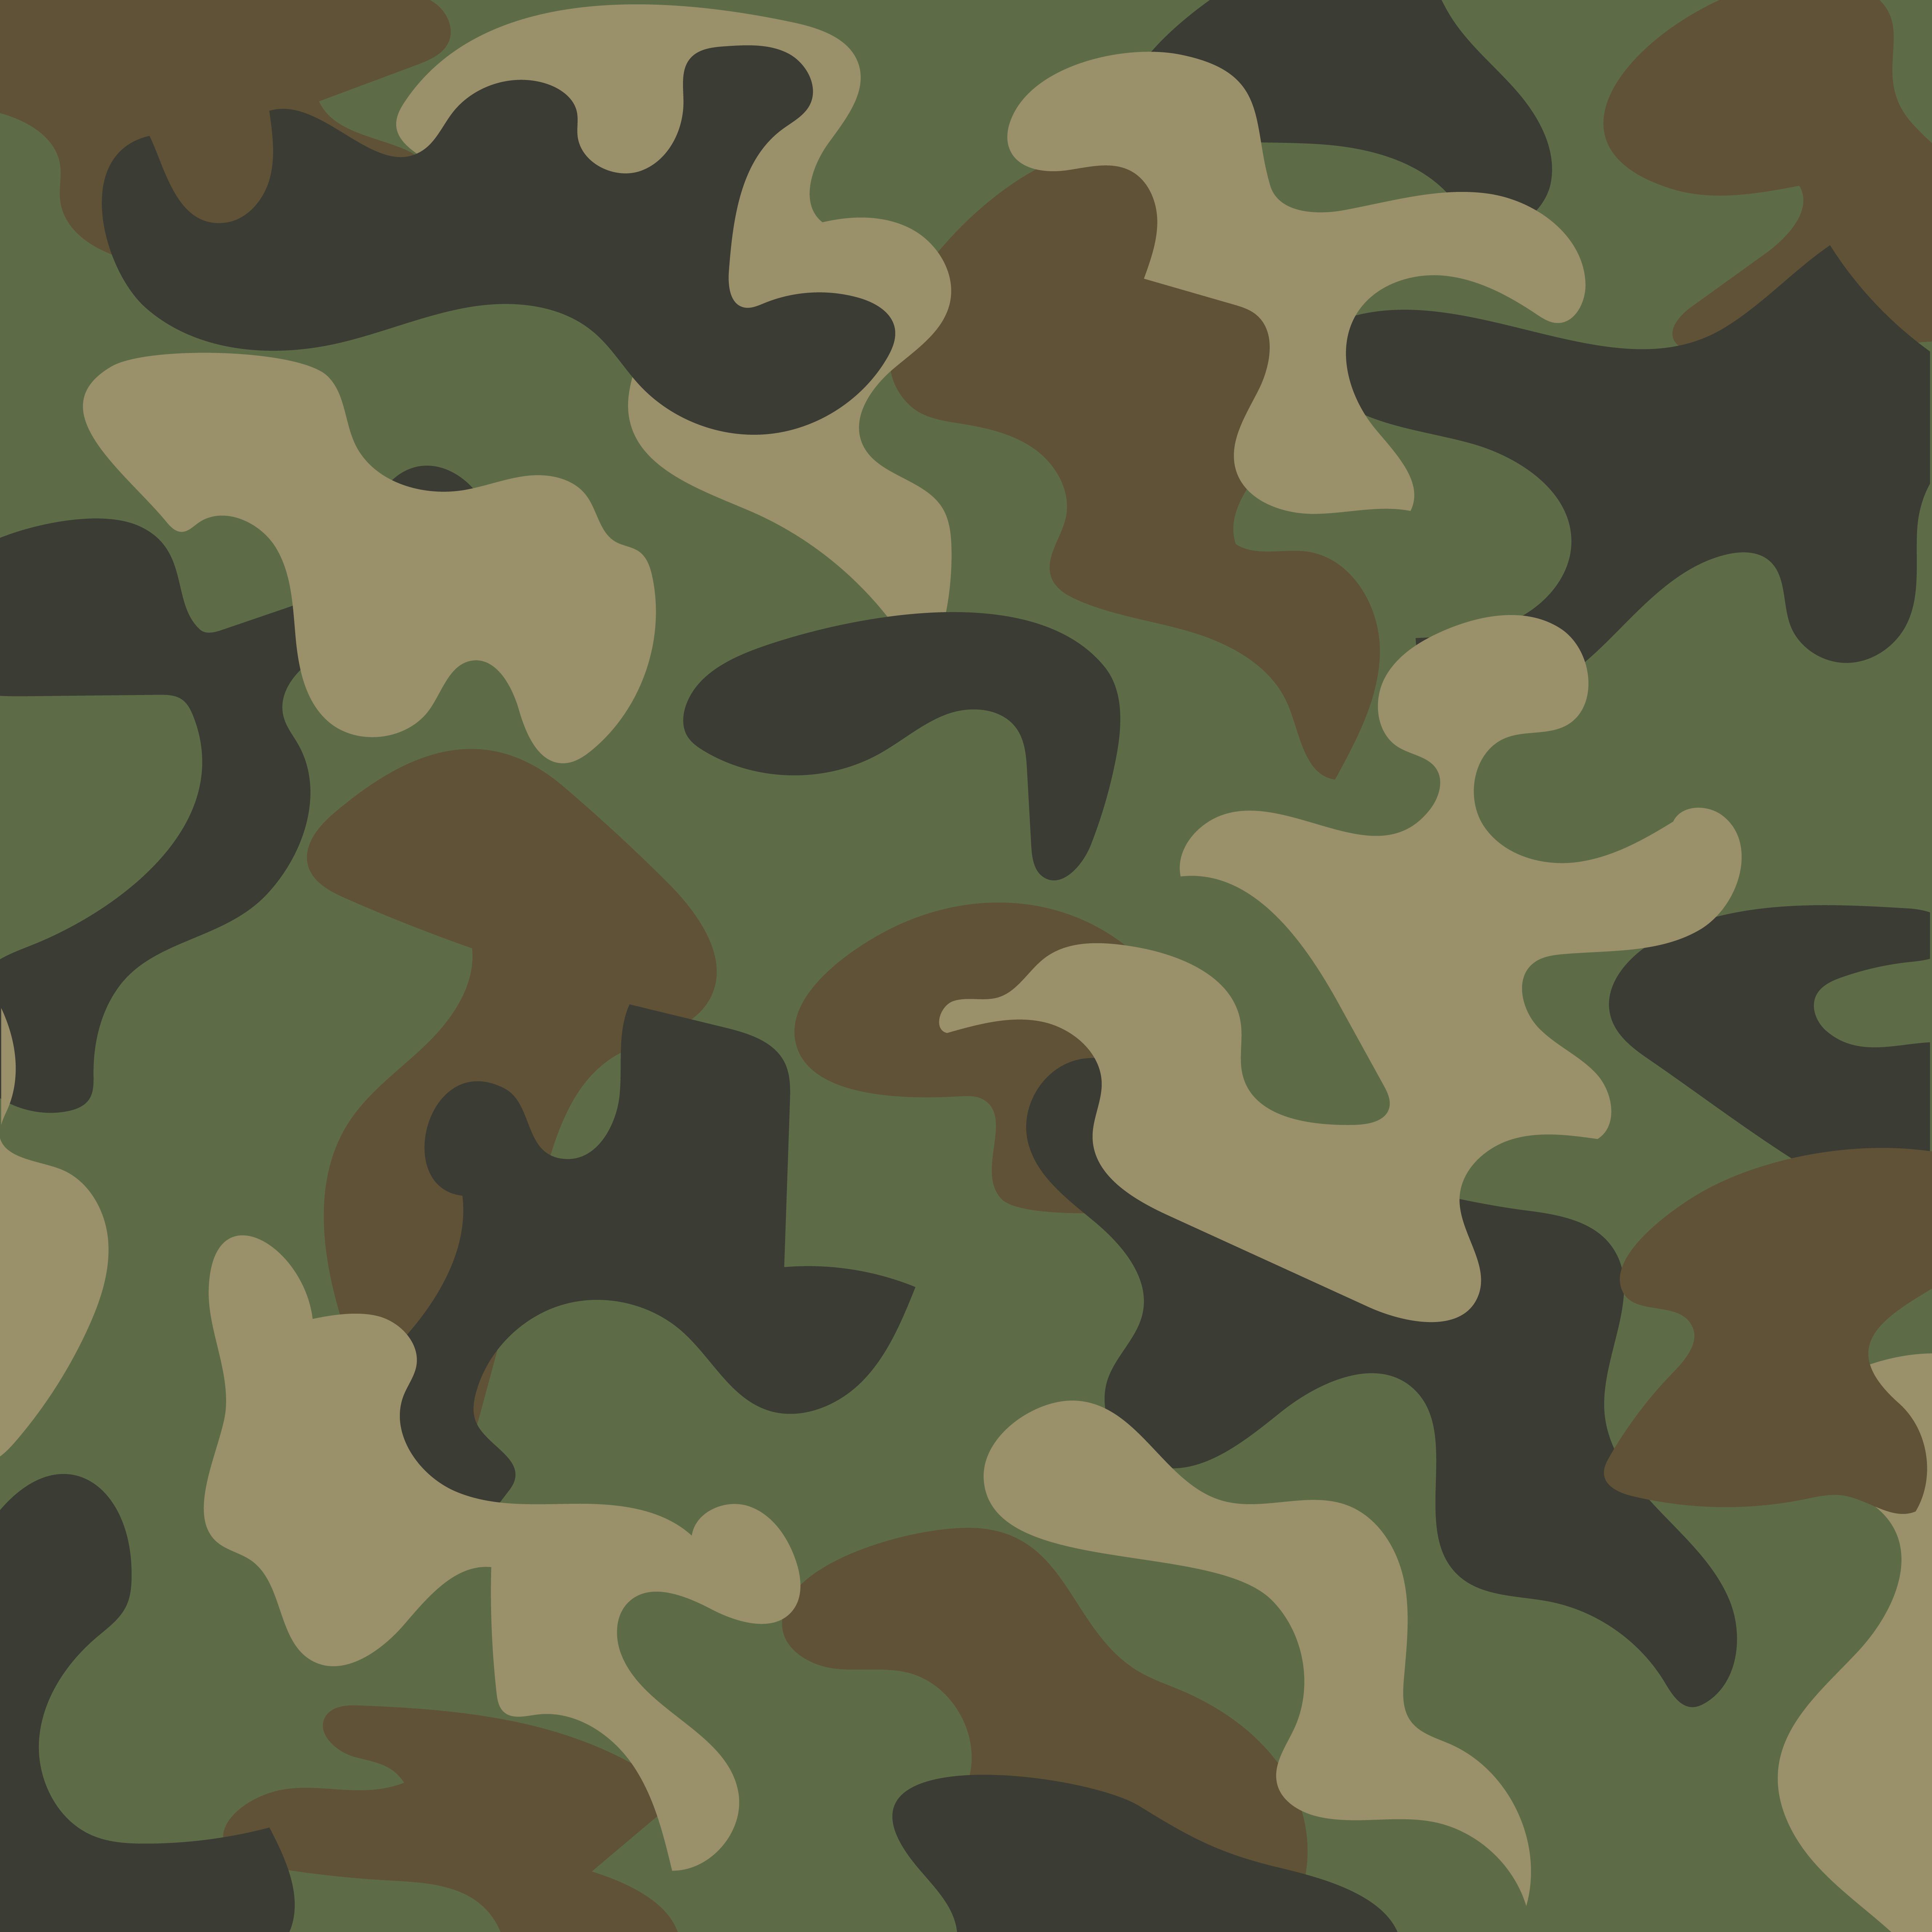 5315 x 5315 · jpeg - Military camouflage pattern background 1312211 - Download Free Vectors ...